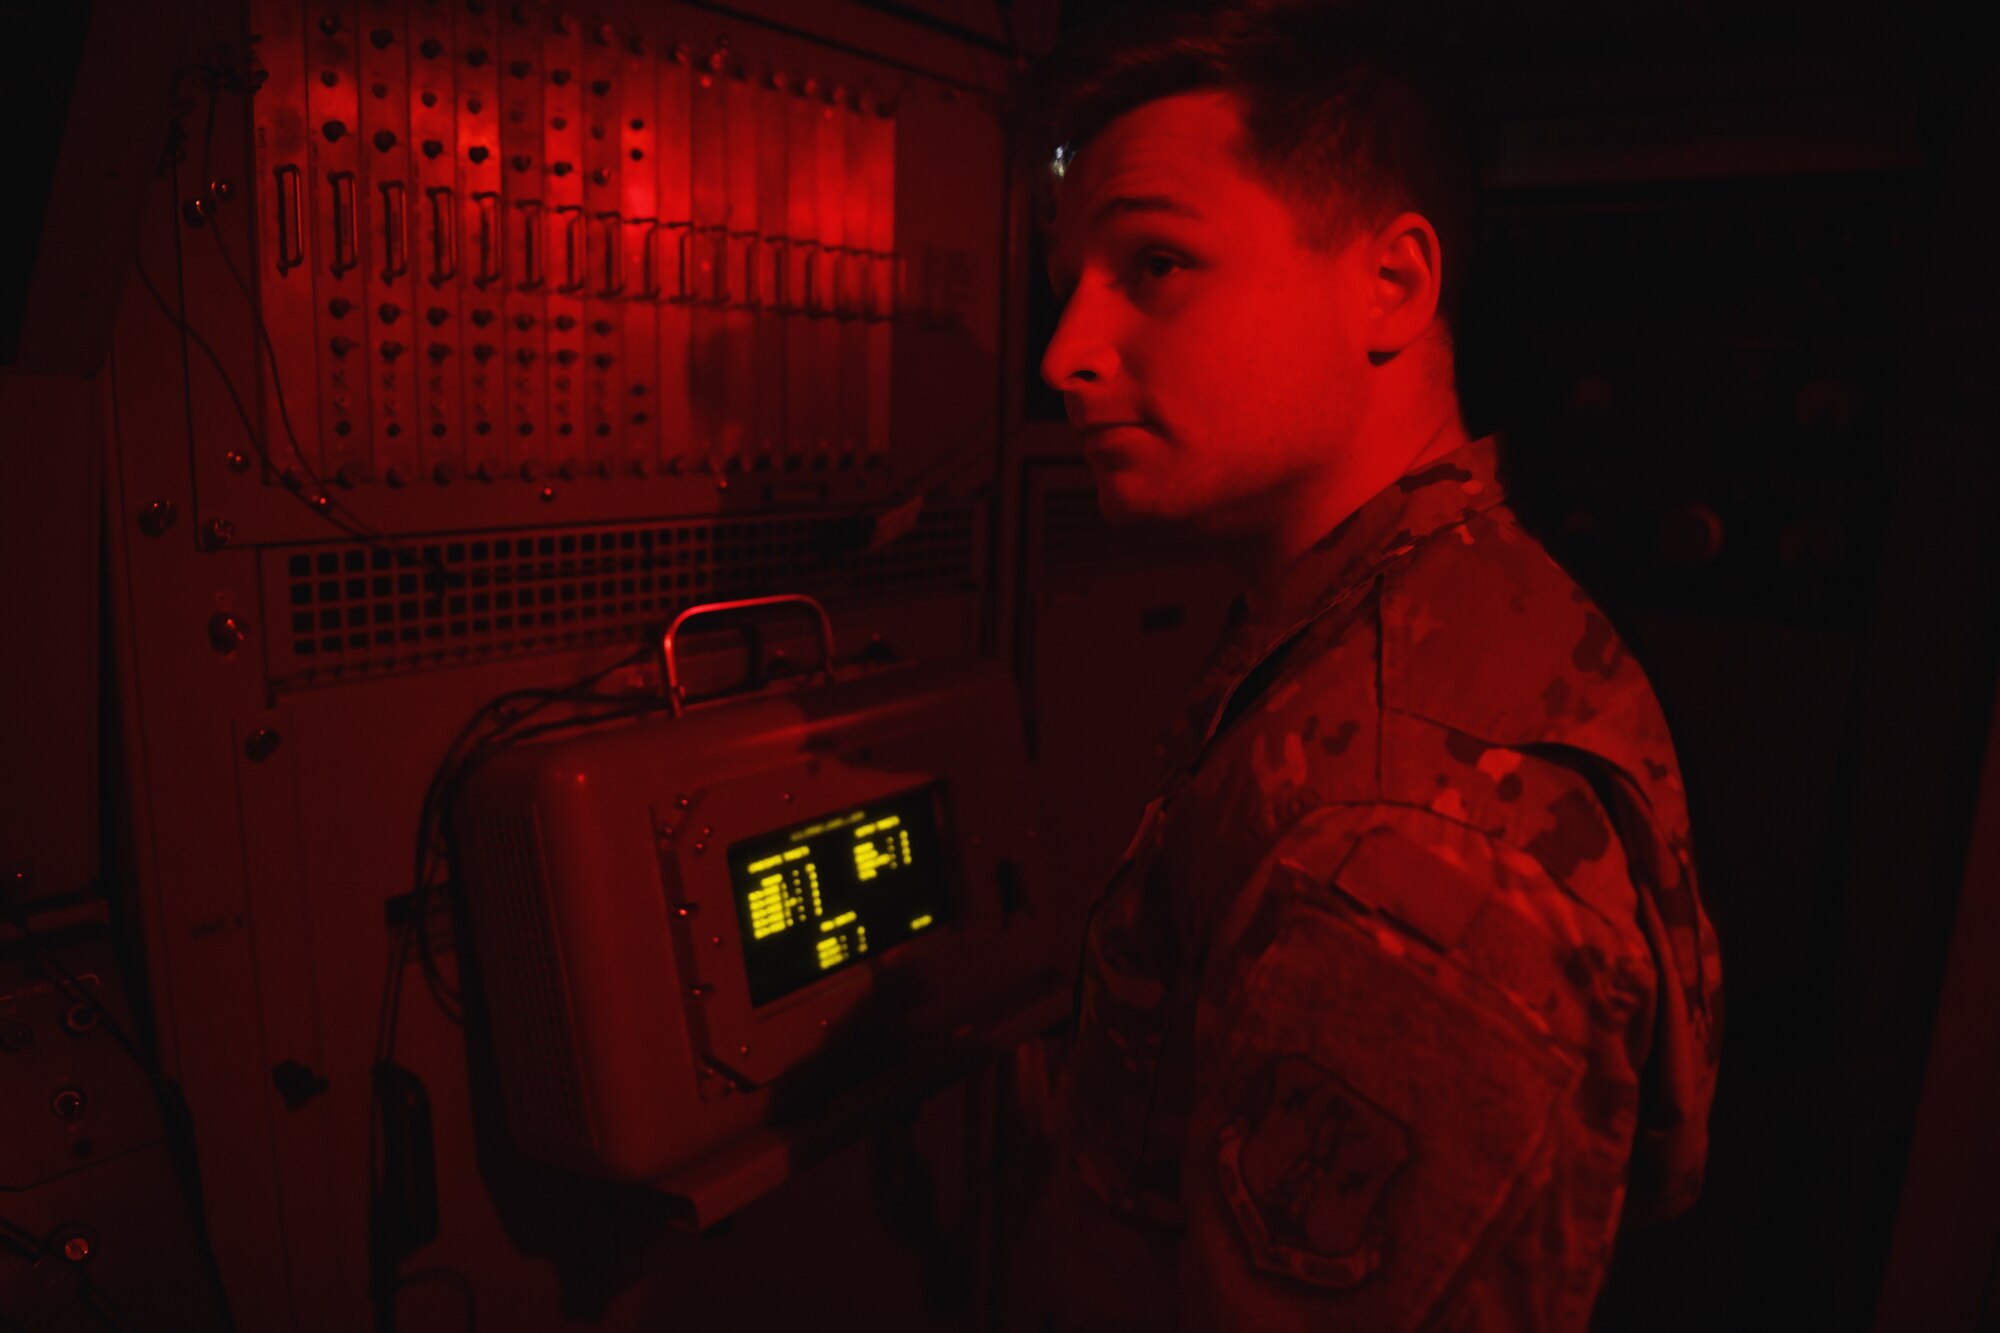 U.S. Air Force Senior Airman Gabriel Willard, a radar technician assigned to the 123rd Air Control Squadron, operates a deployable field radar system June 13, 2022  during Agile Rage 22 at the Alpena Combat Readiness Training Center in Michigan. Airmen conducted numerous mission-essential tasks during Agile Rage 22, including joint intelligence operations, airspace control, search and rescue coordination, intra-theater airlift, joint fires, close air support, interdiction of enemy capabilities, and Agile Combat Employment. (U.S. Air National Guard photo by Master Sgt. Shane Hughes)